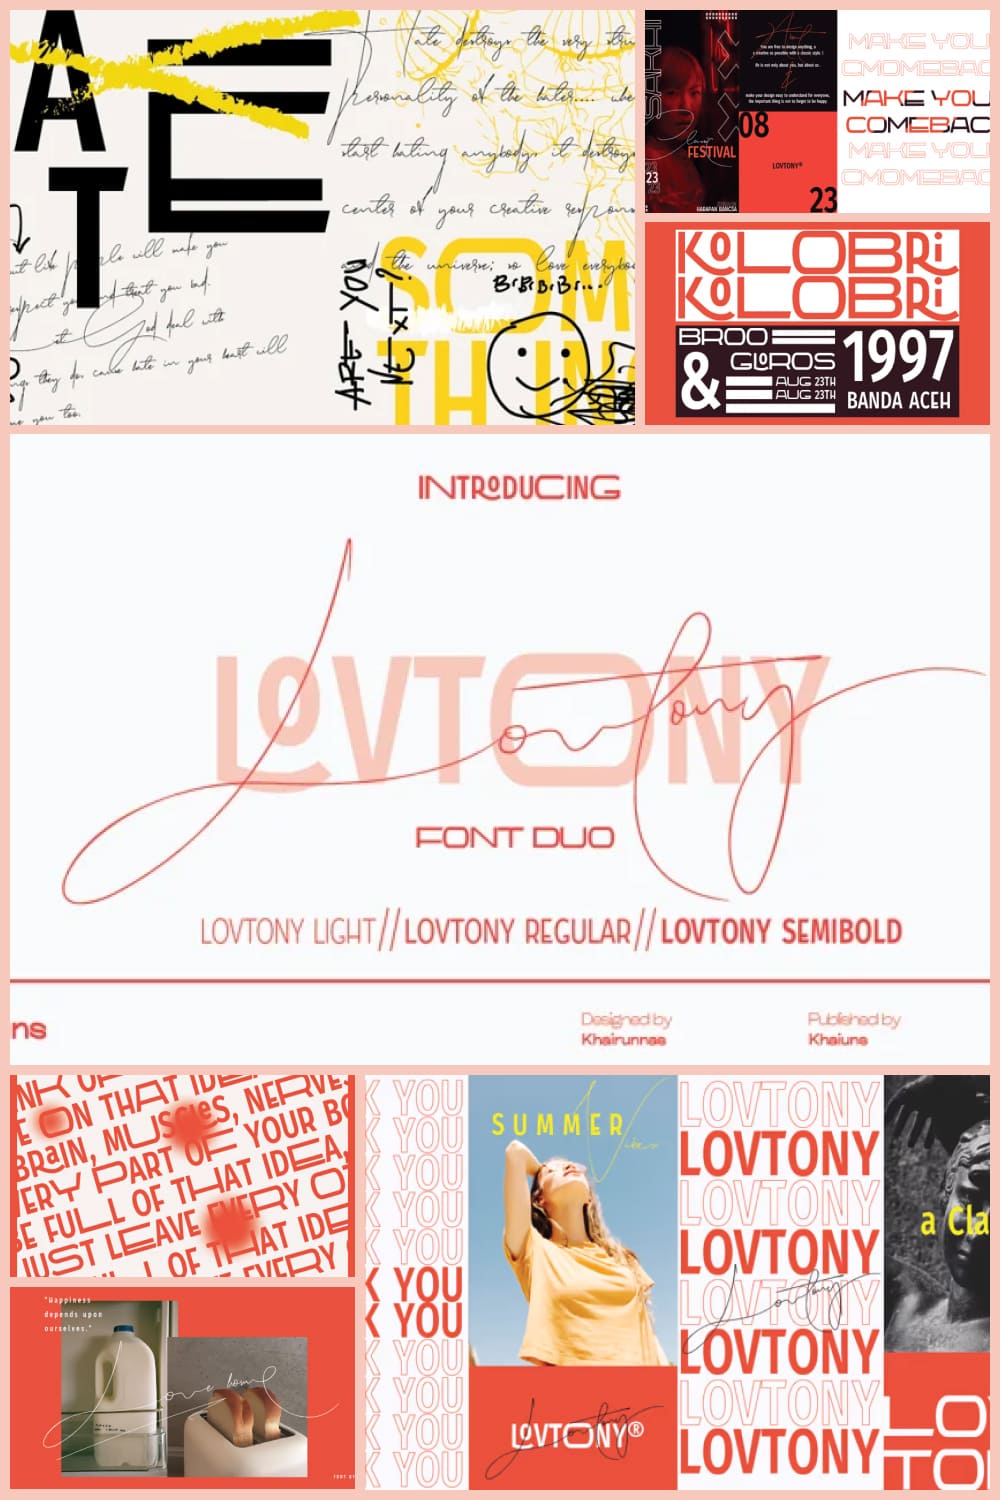 Collage of images with Lovtony font.